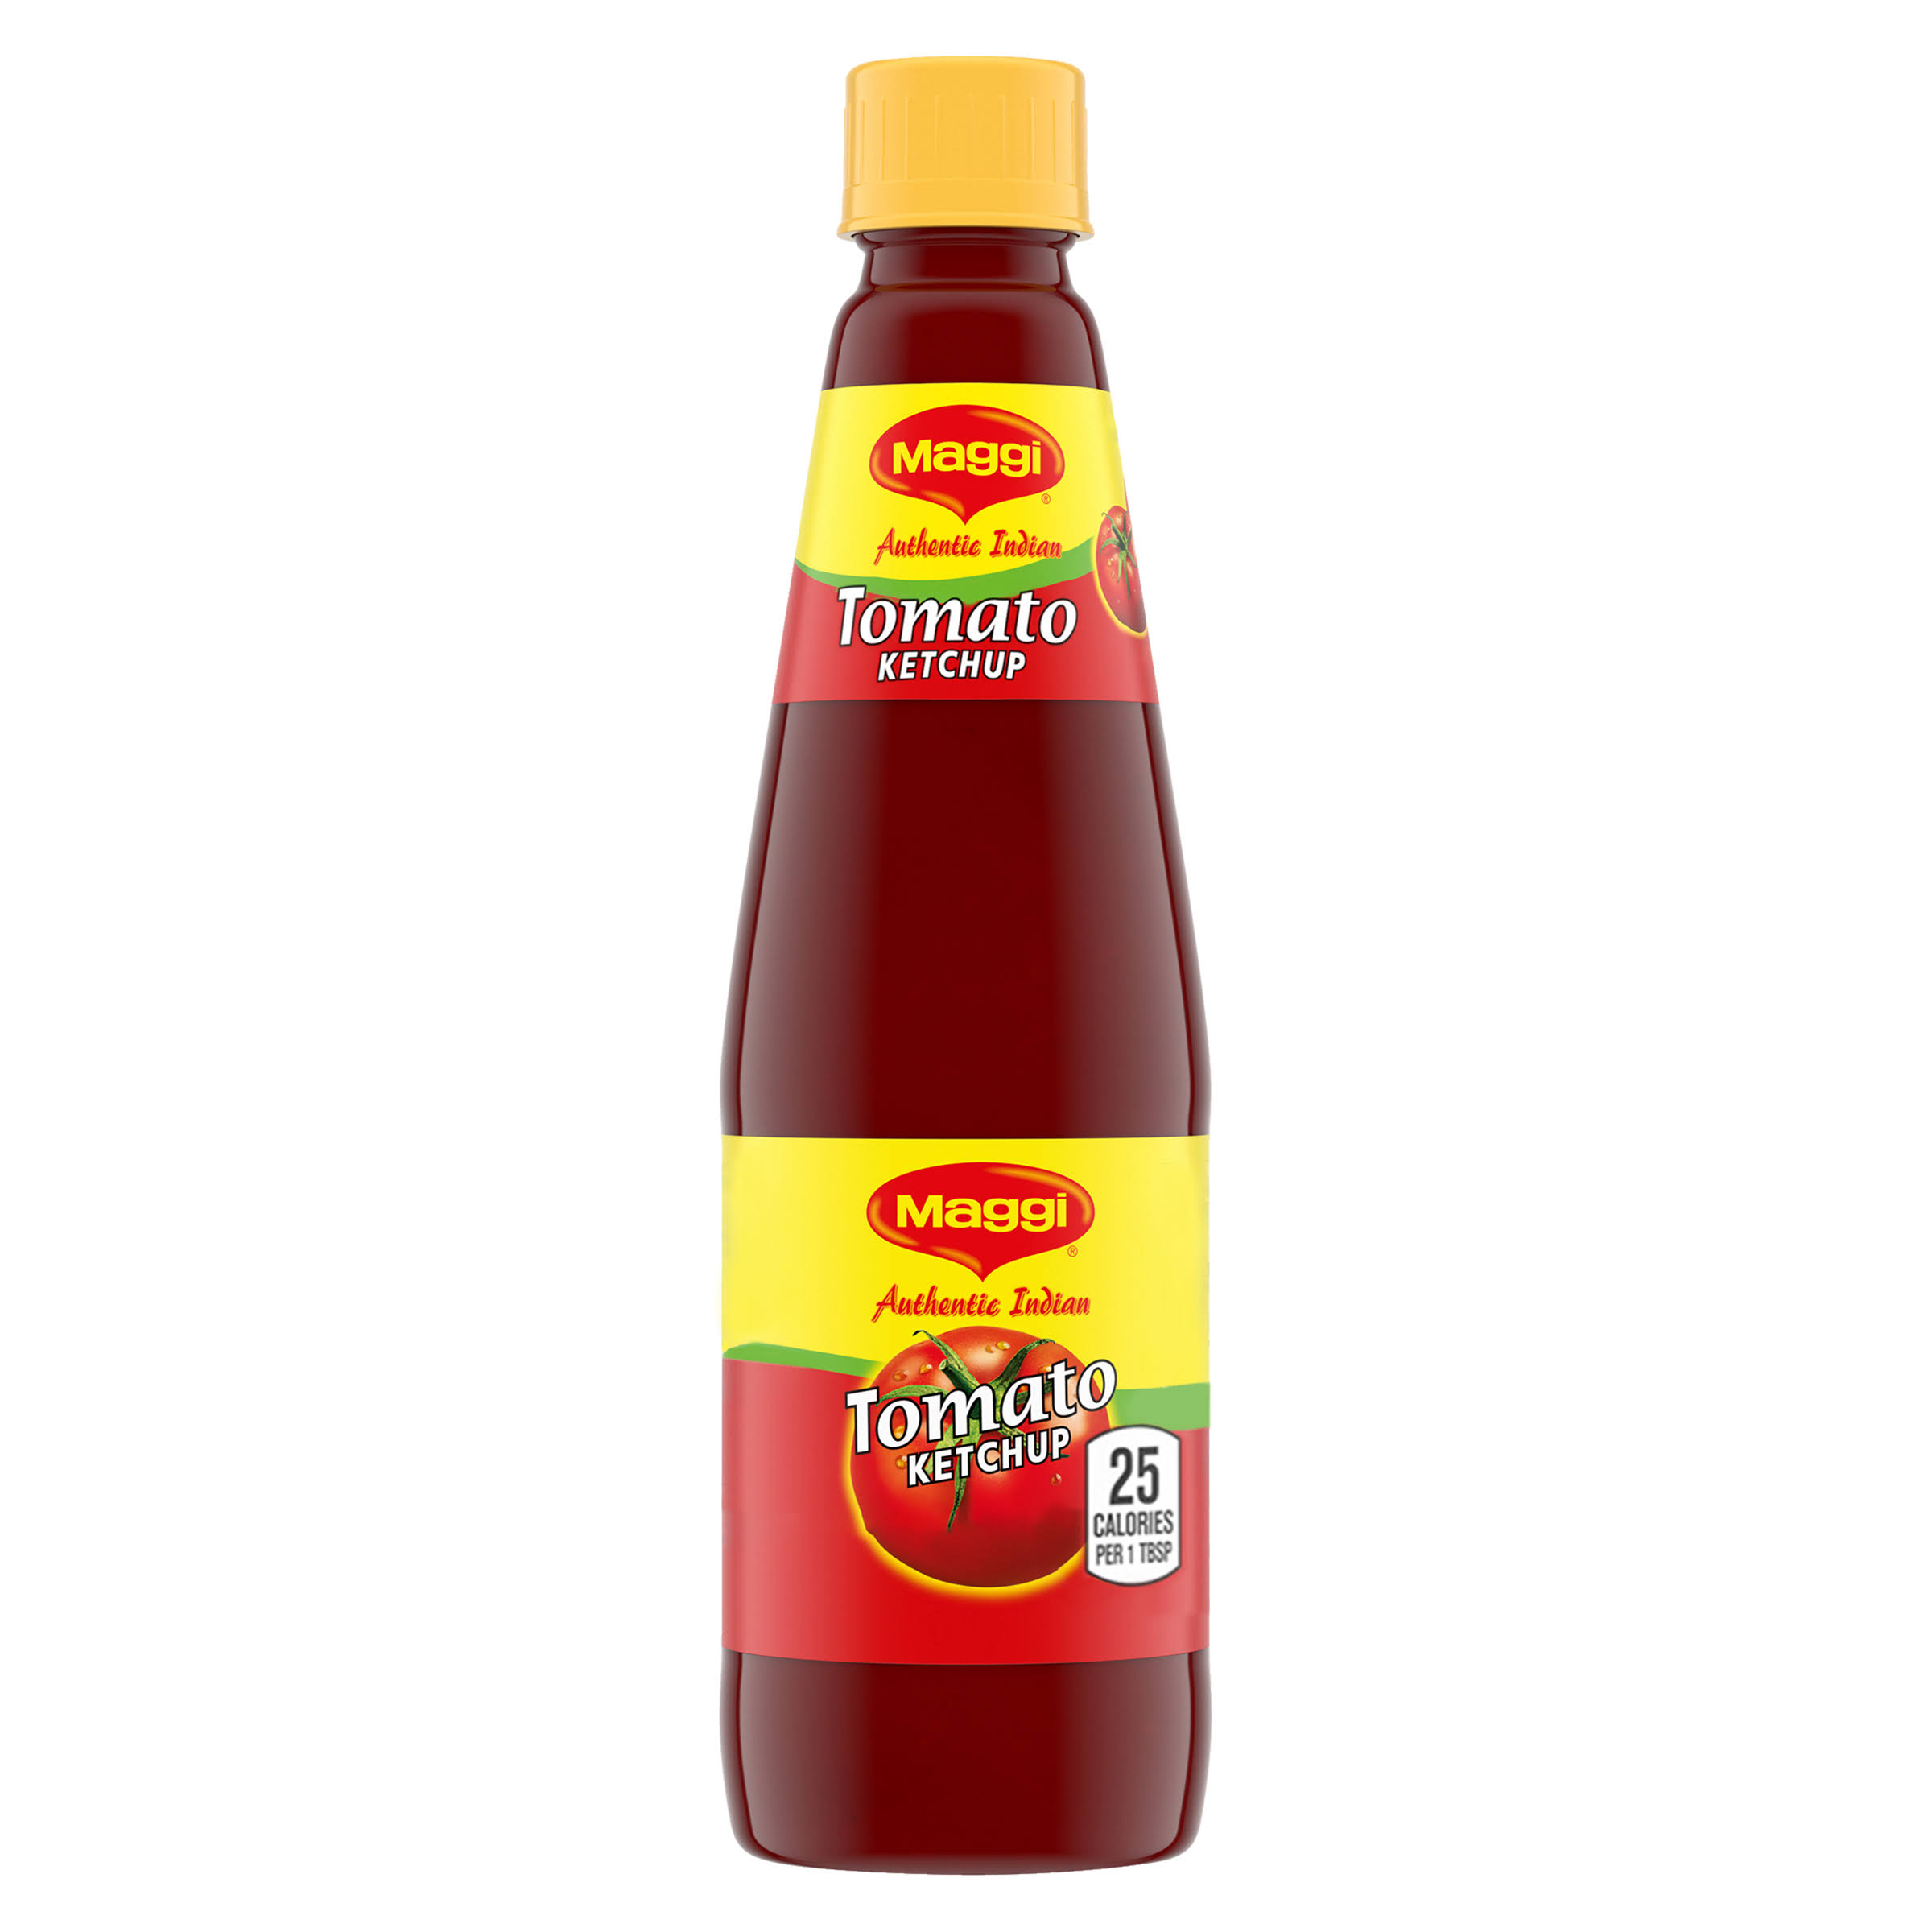 Maggi Tomato Ketchup, Authentic Indian - 1.1 lb